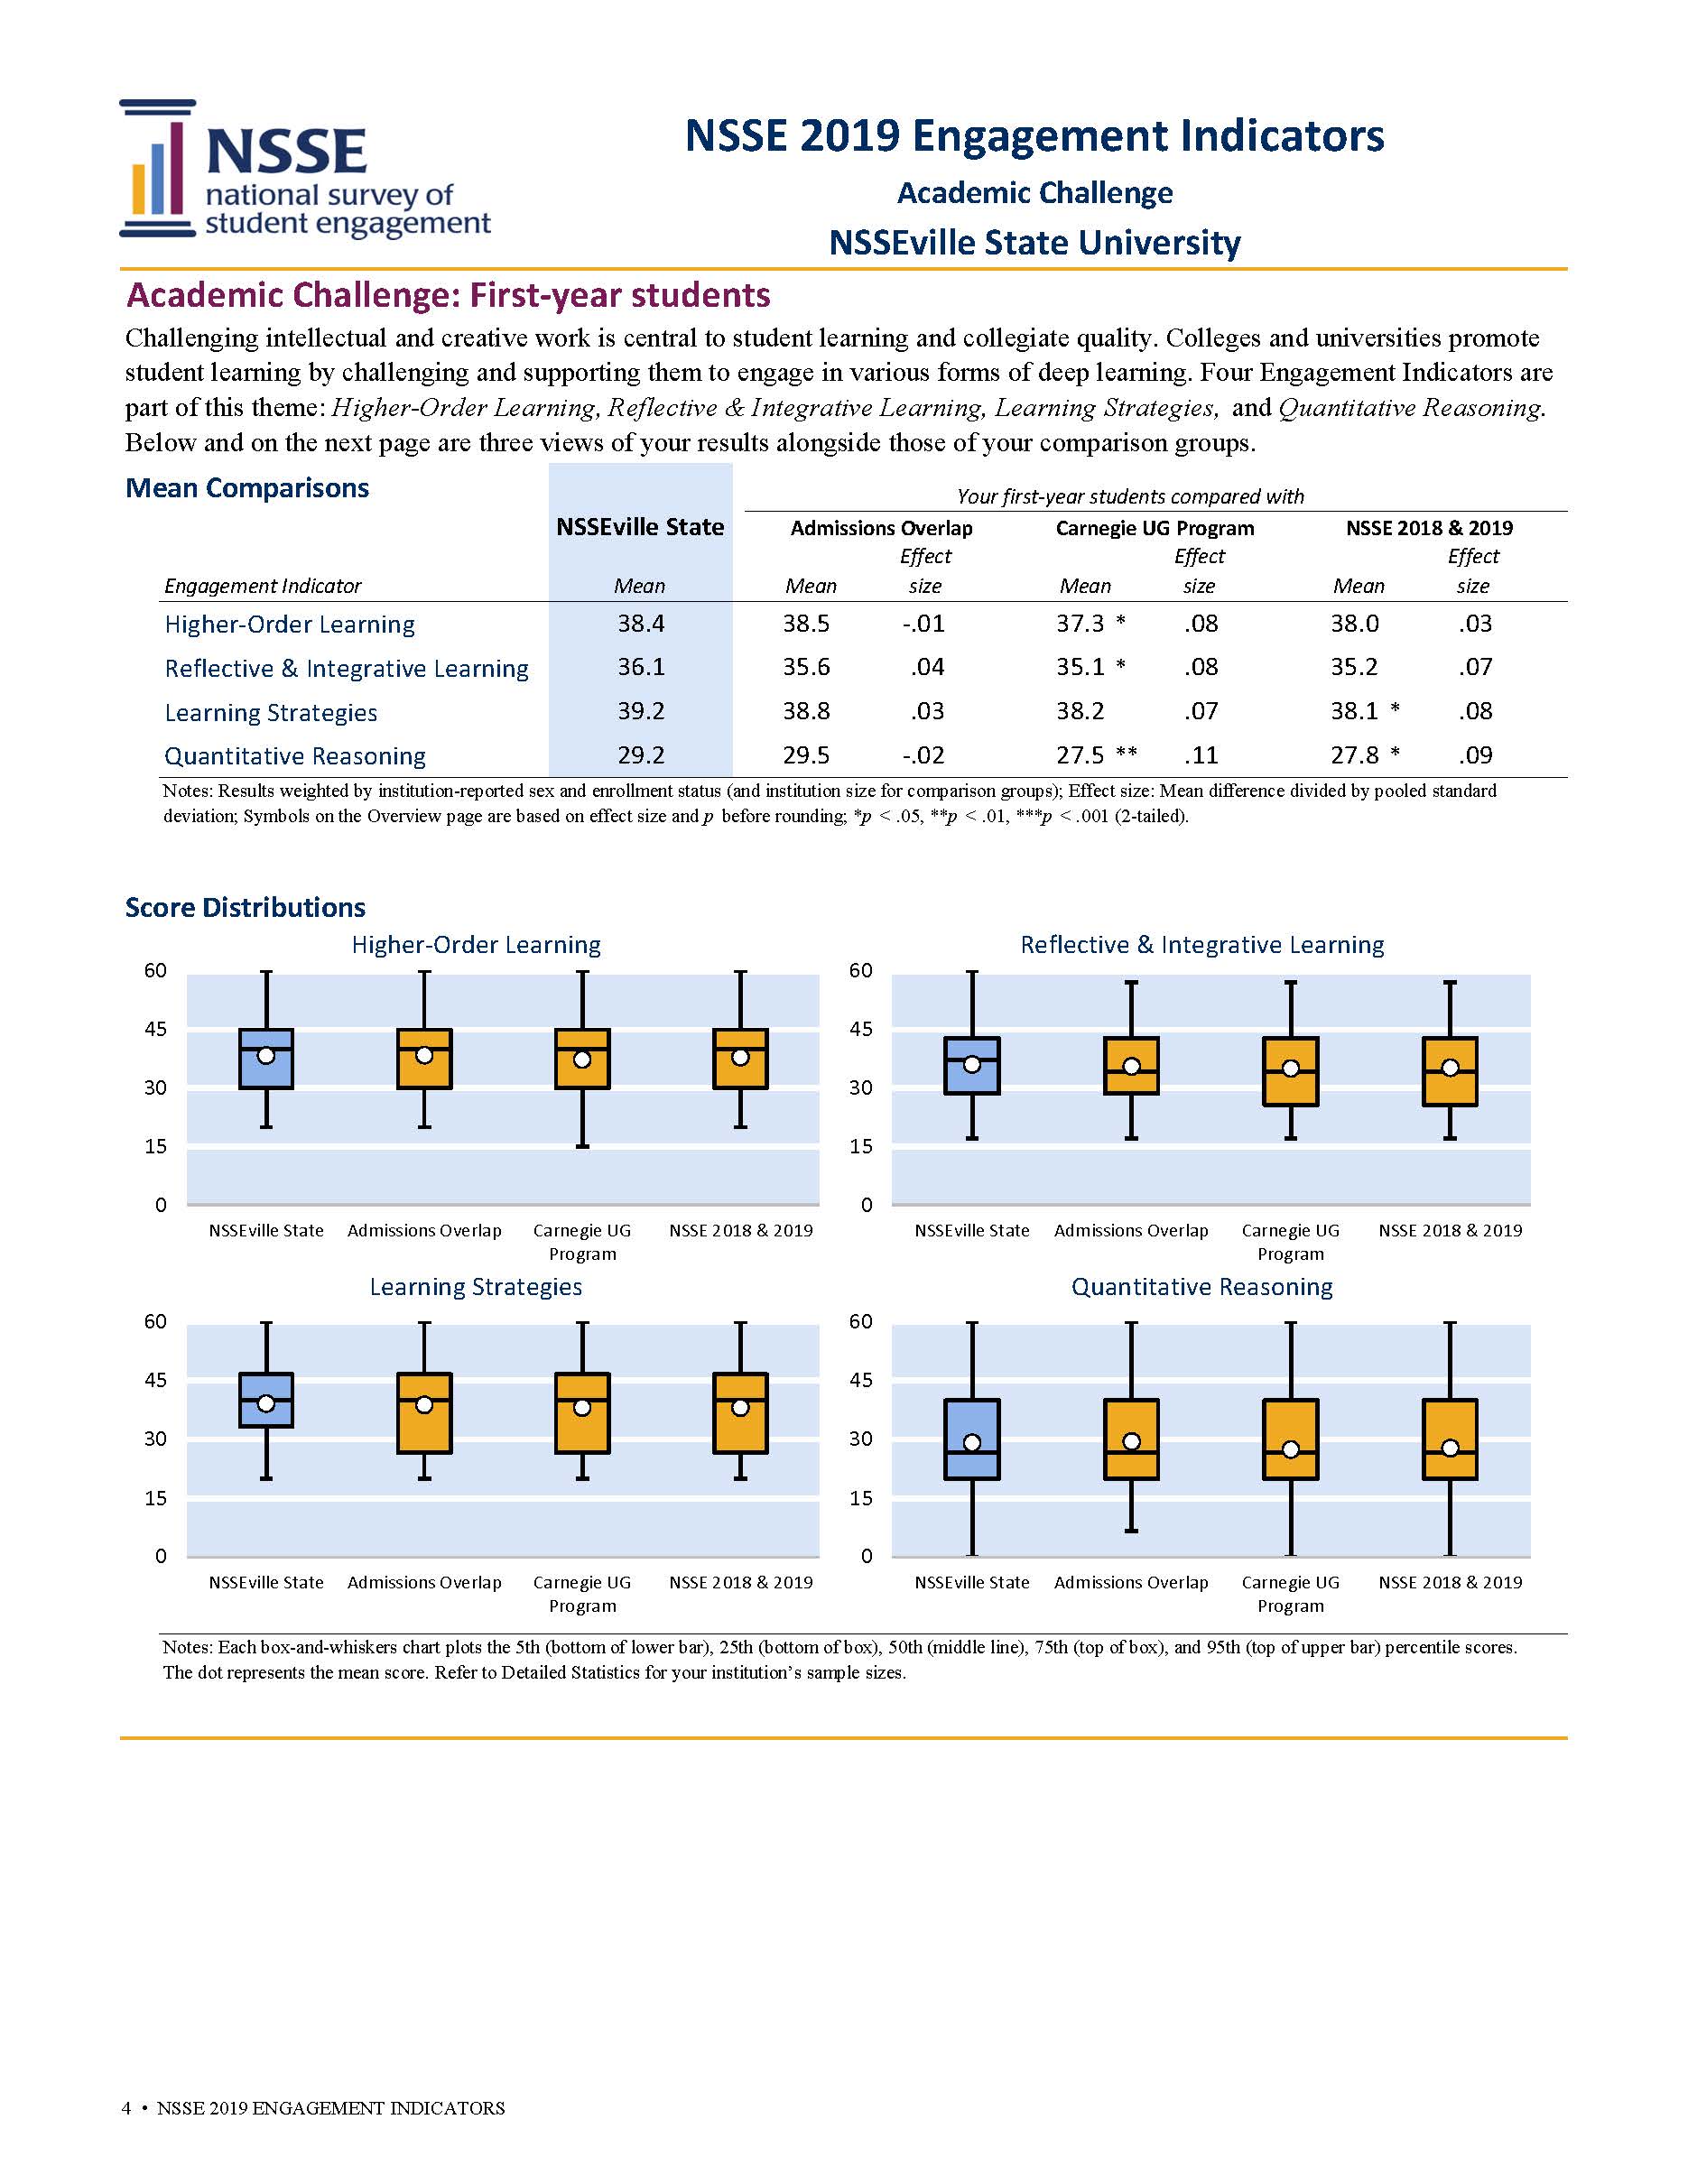 Sample Report: page 4 of NSSE Engagement Indicators